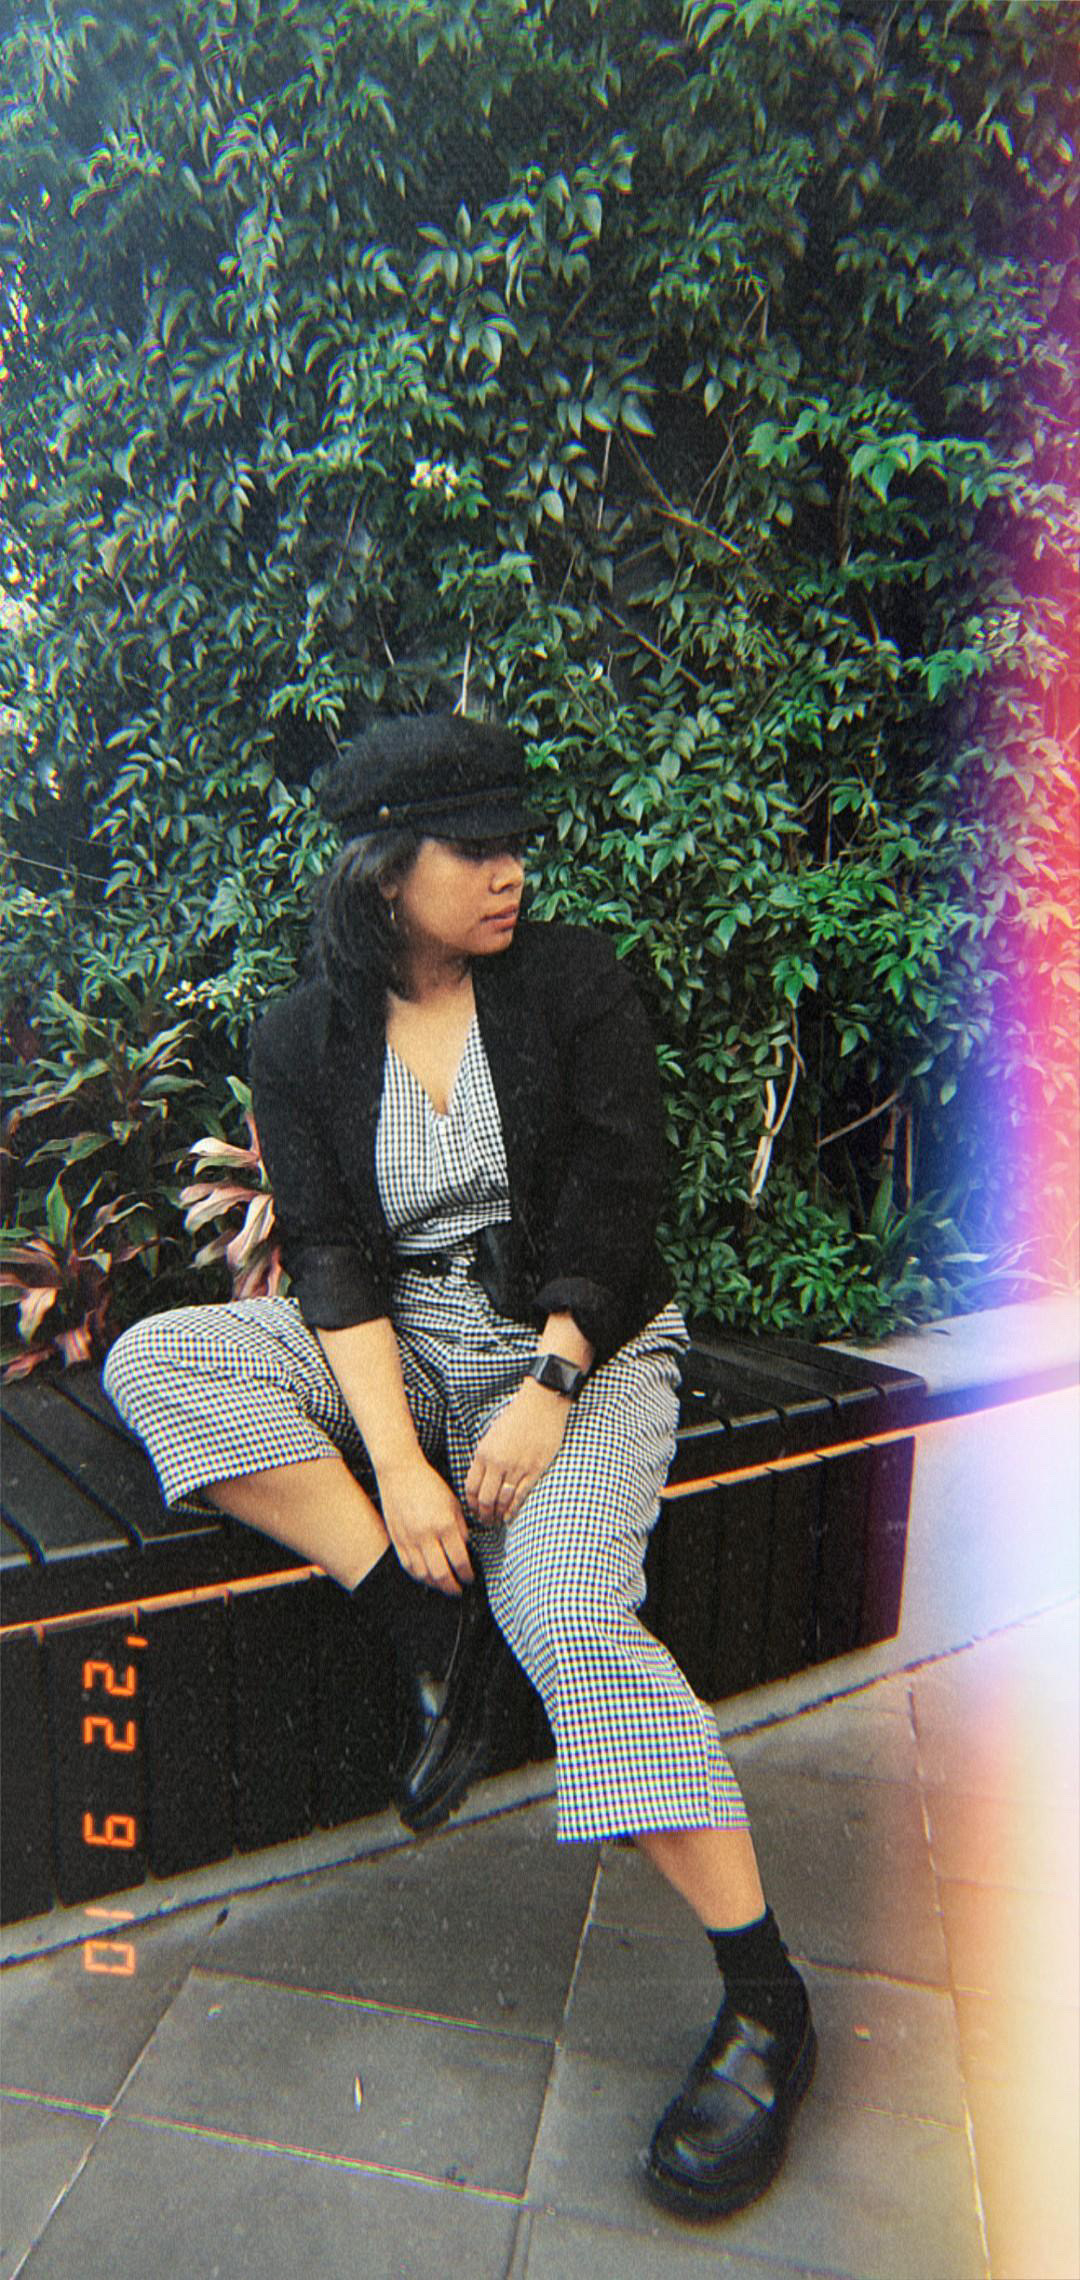 Aurelia Andrea check jumpsuit worn with black blazer, chauffer’s hat and black chunky loafers, sitting on a bench in front of green leaves